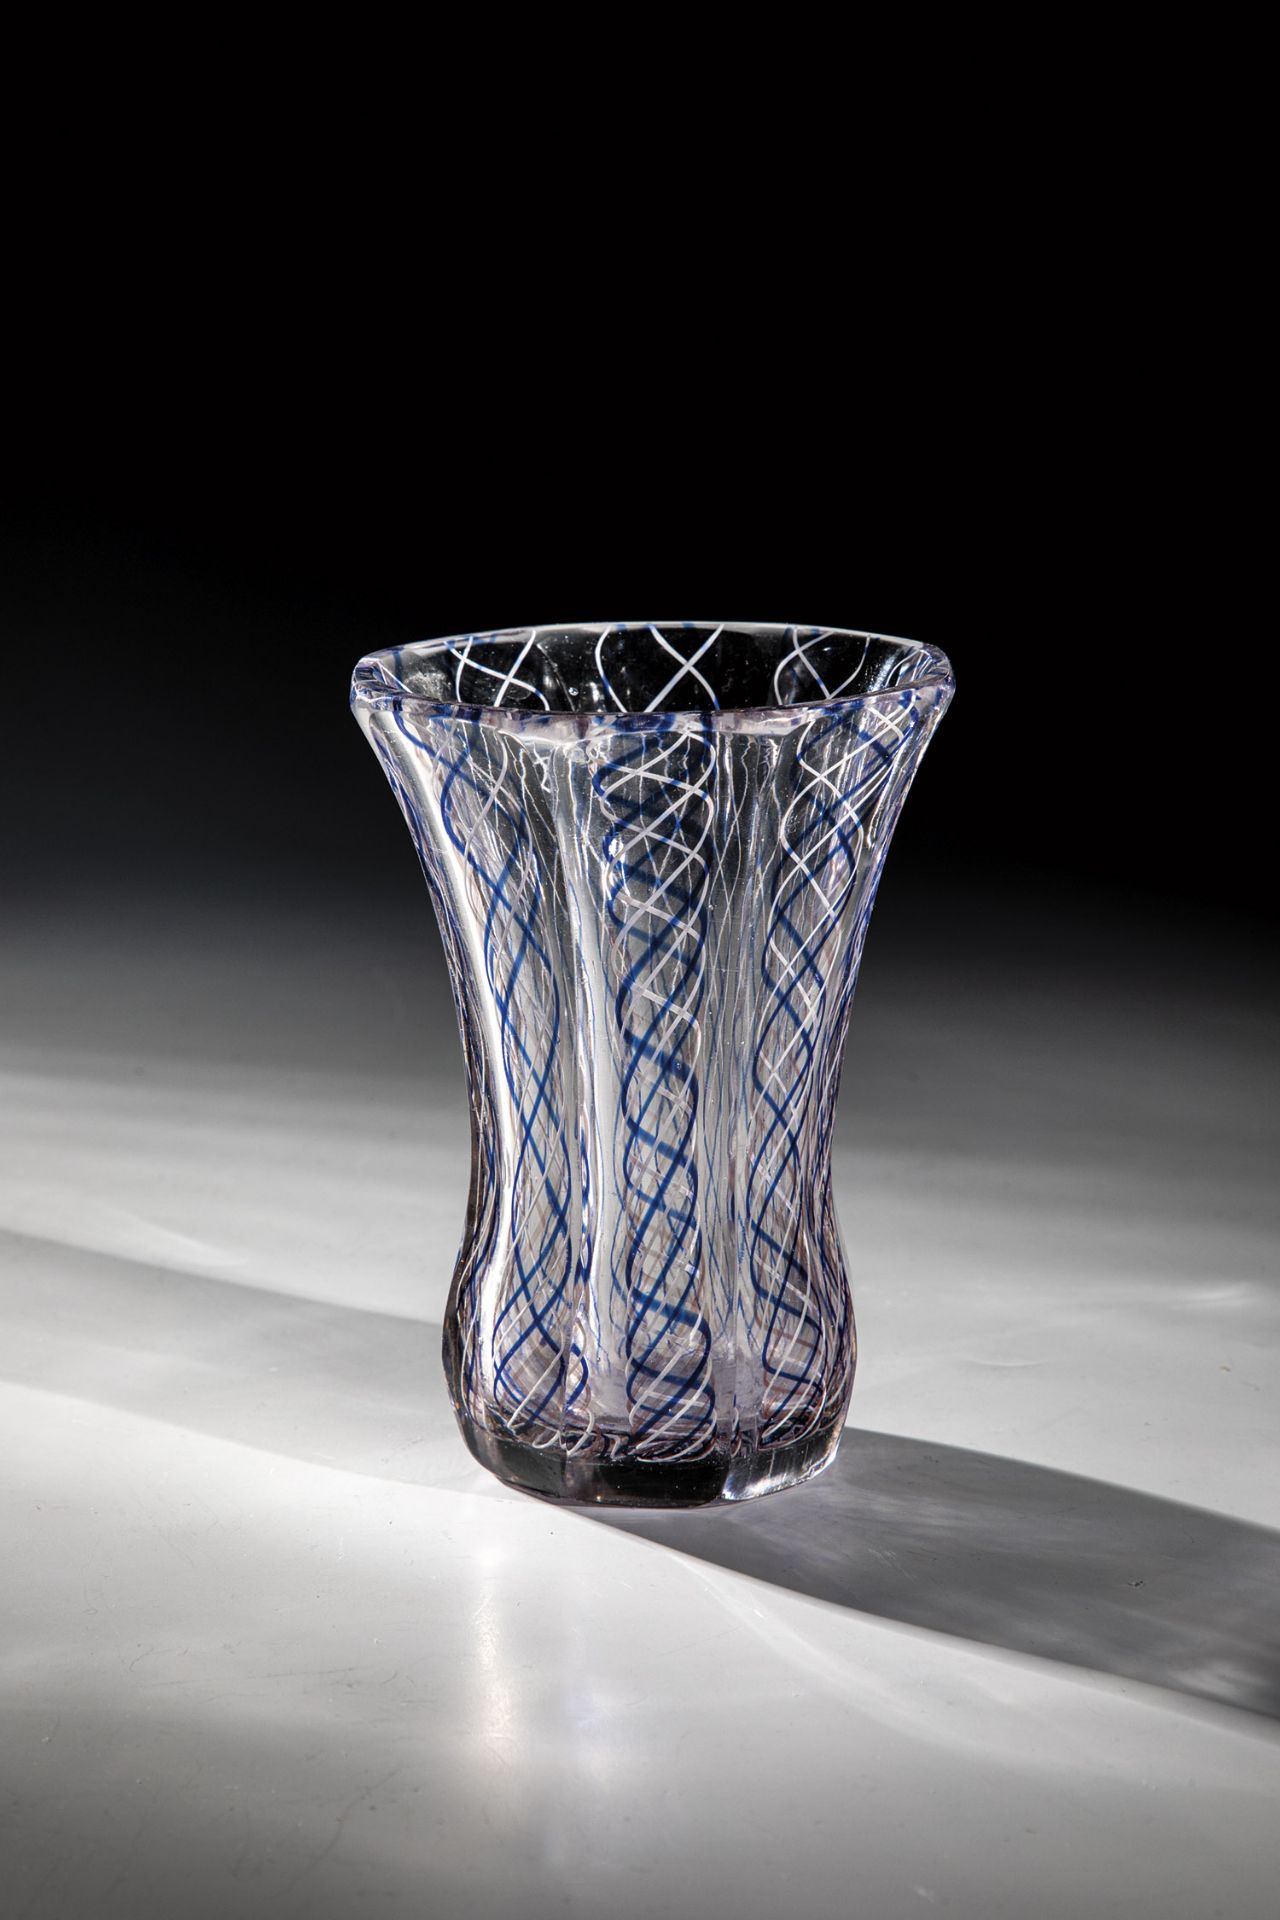 Josephinenhuette, Schreiberhau, ca. 1835 Colourless, multi-faceted glass with fused glass threads in